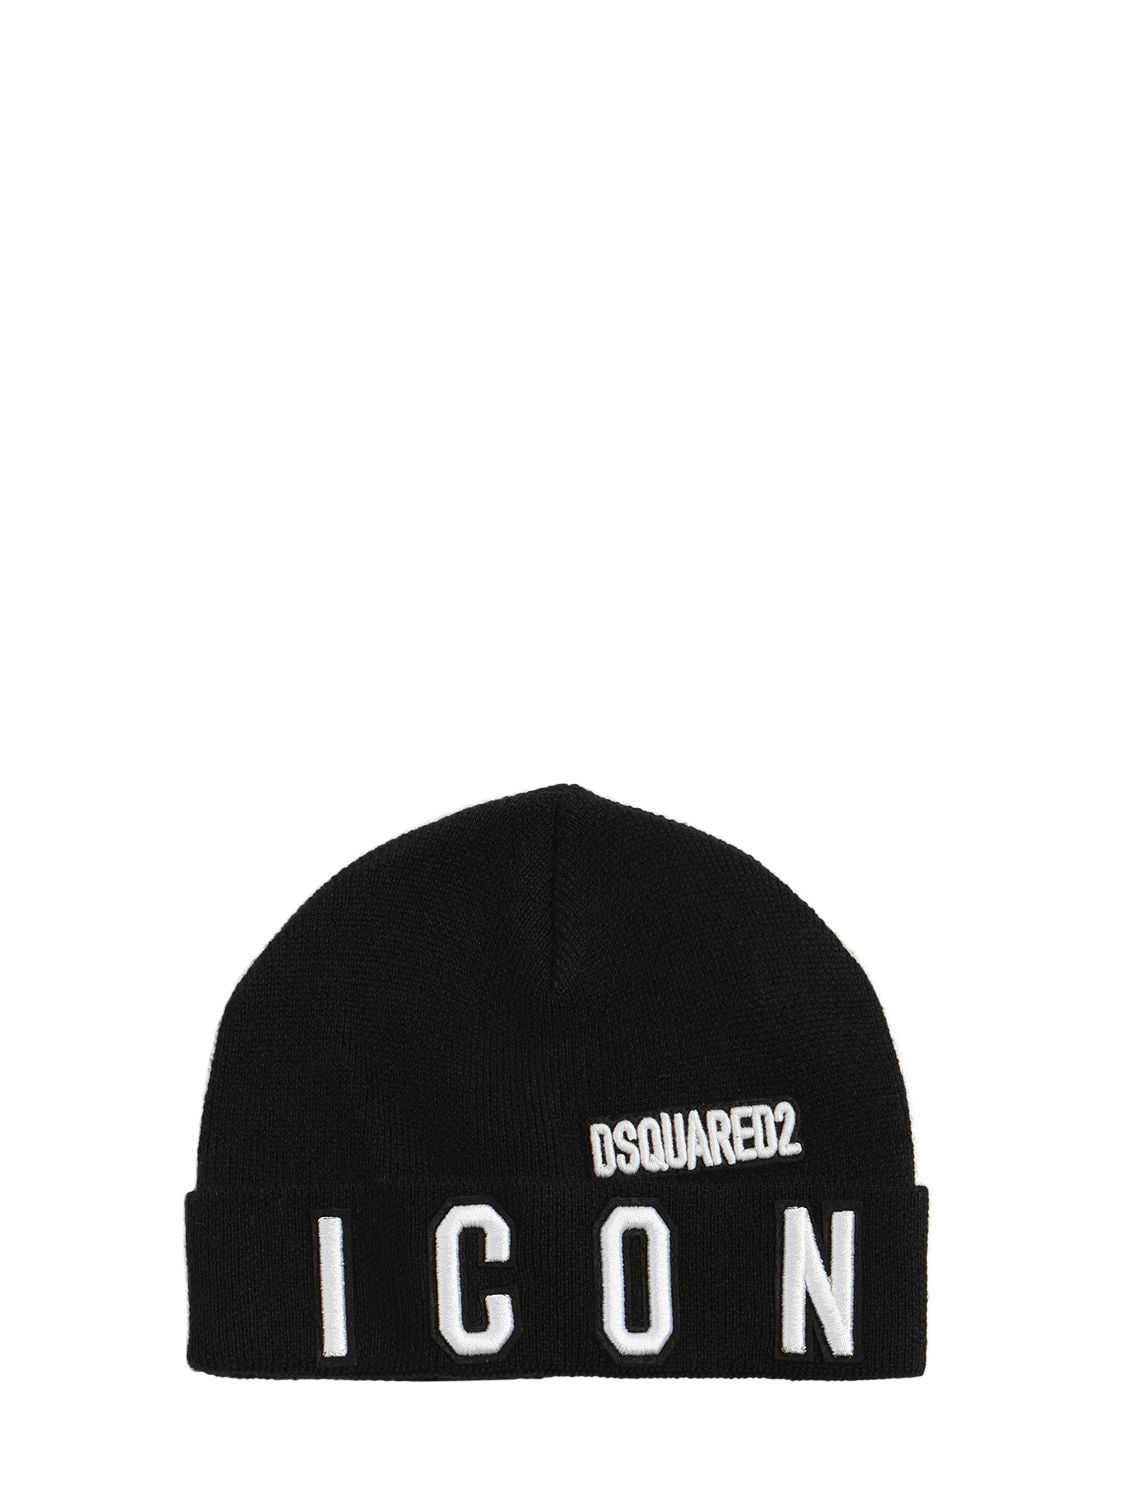 DSQUARED2 ICON EMBROIDERED WOOL BLEND BEANIE